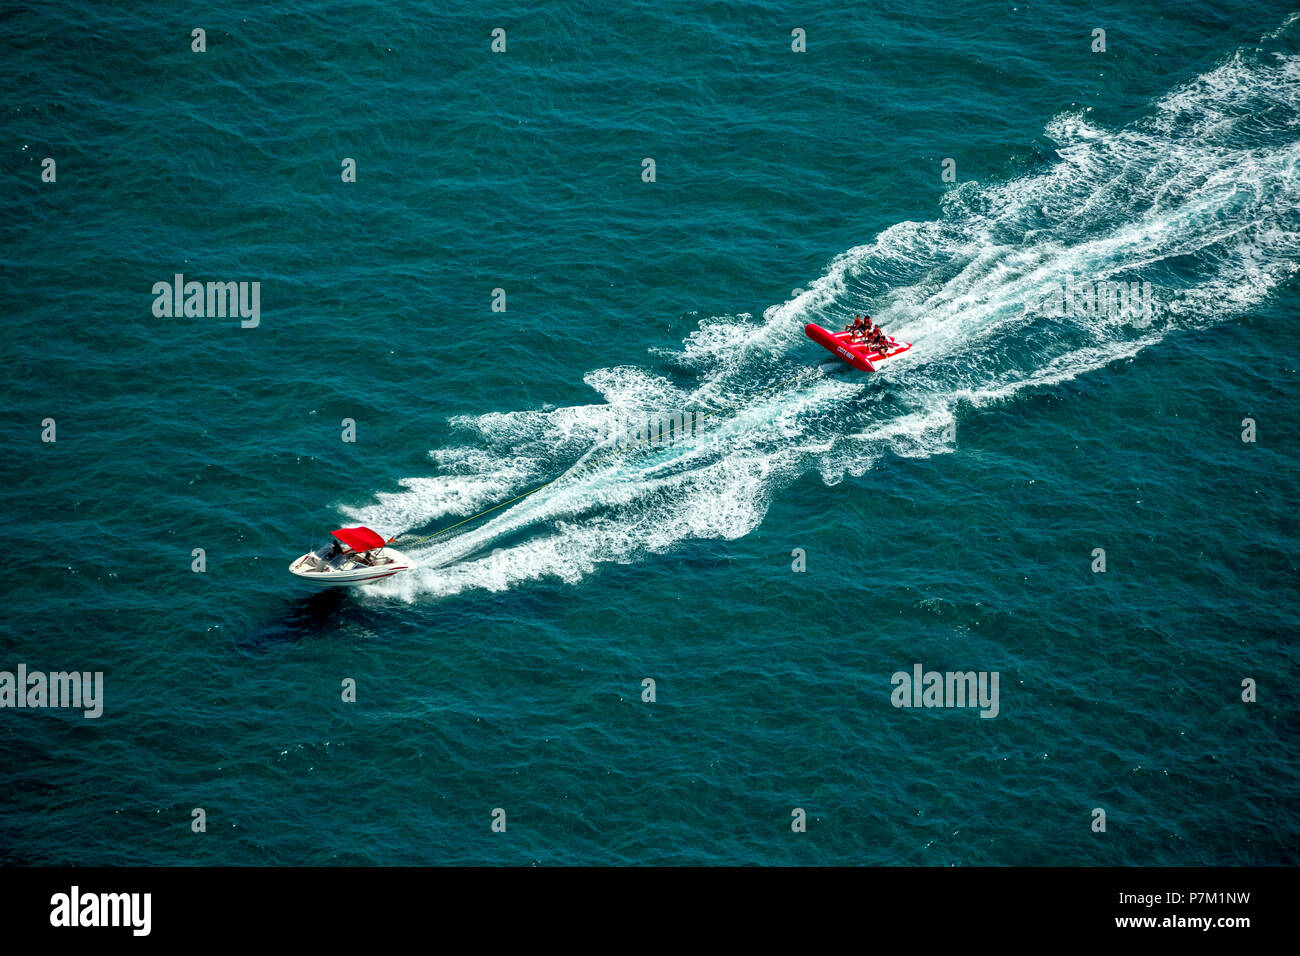 Air mat pulled by a motorboat, water fun on the Mediterranean, Agde, Hérault department, Occitanie region, France Stock Photo